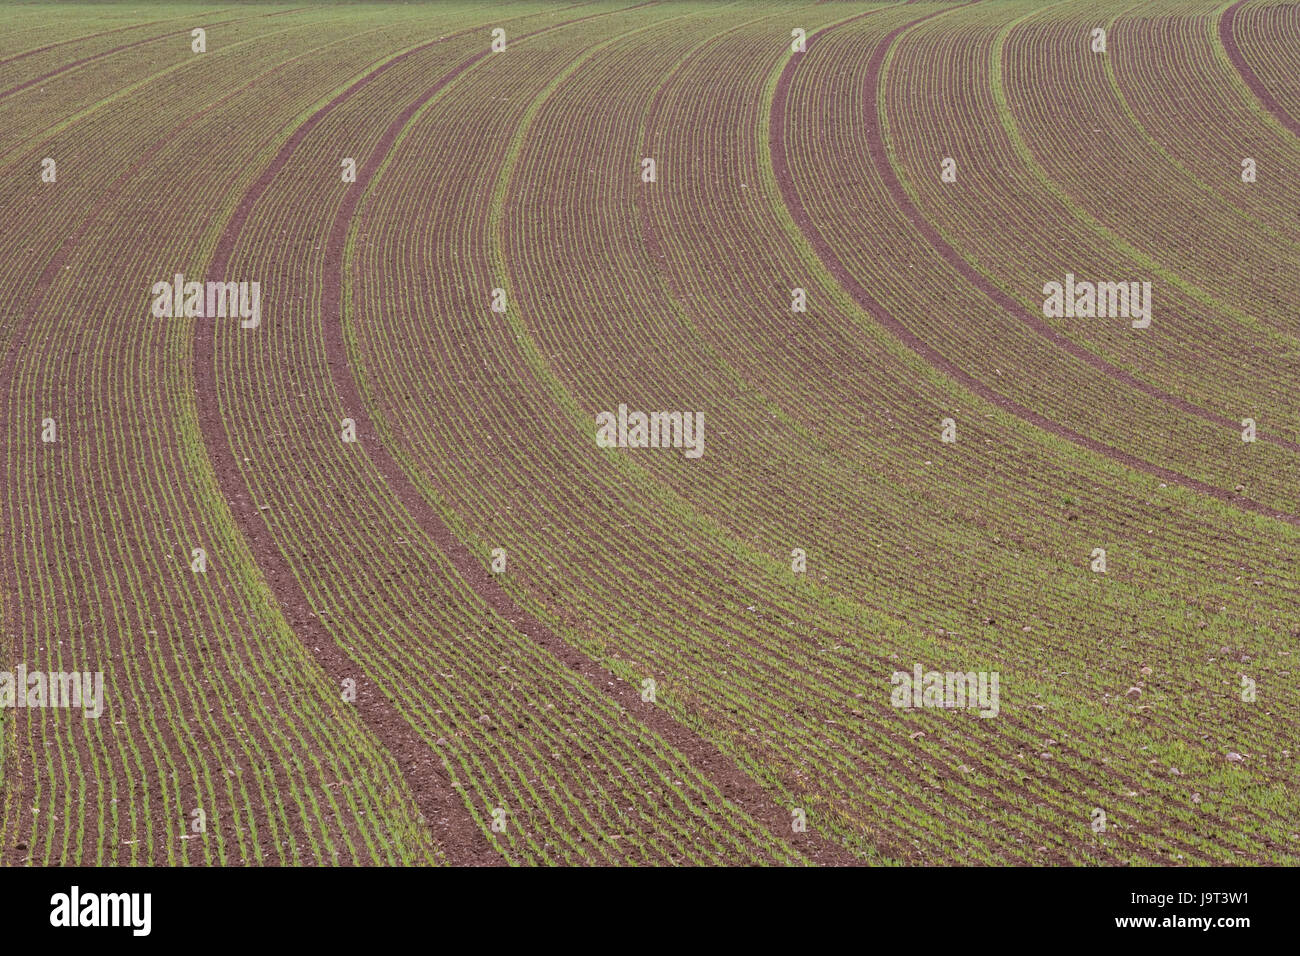 Field,seedlings,economy,agriculture,field economy,agriculture,annex,cultivation,plants,little plants,instincts,small,young,useful plants,samples,series,sowing series,lines,green,brown,curved,bend,growth,nobody,background, Stock Photo